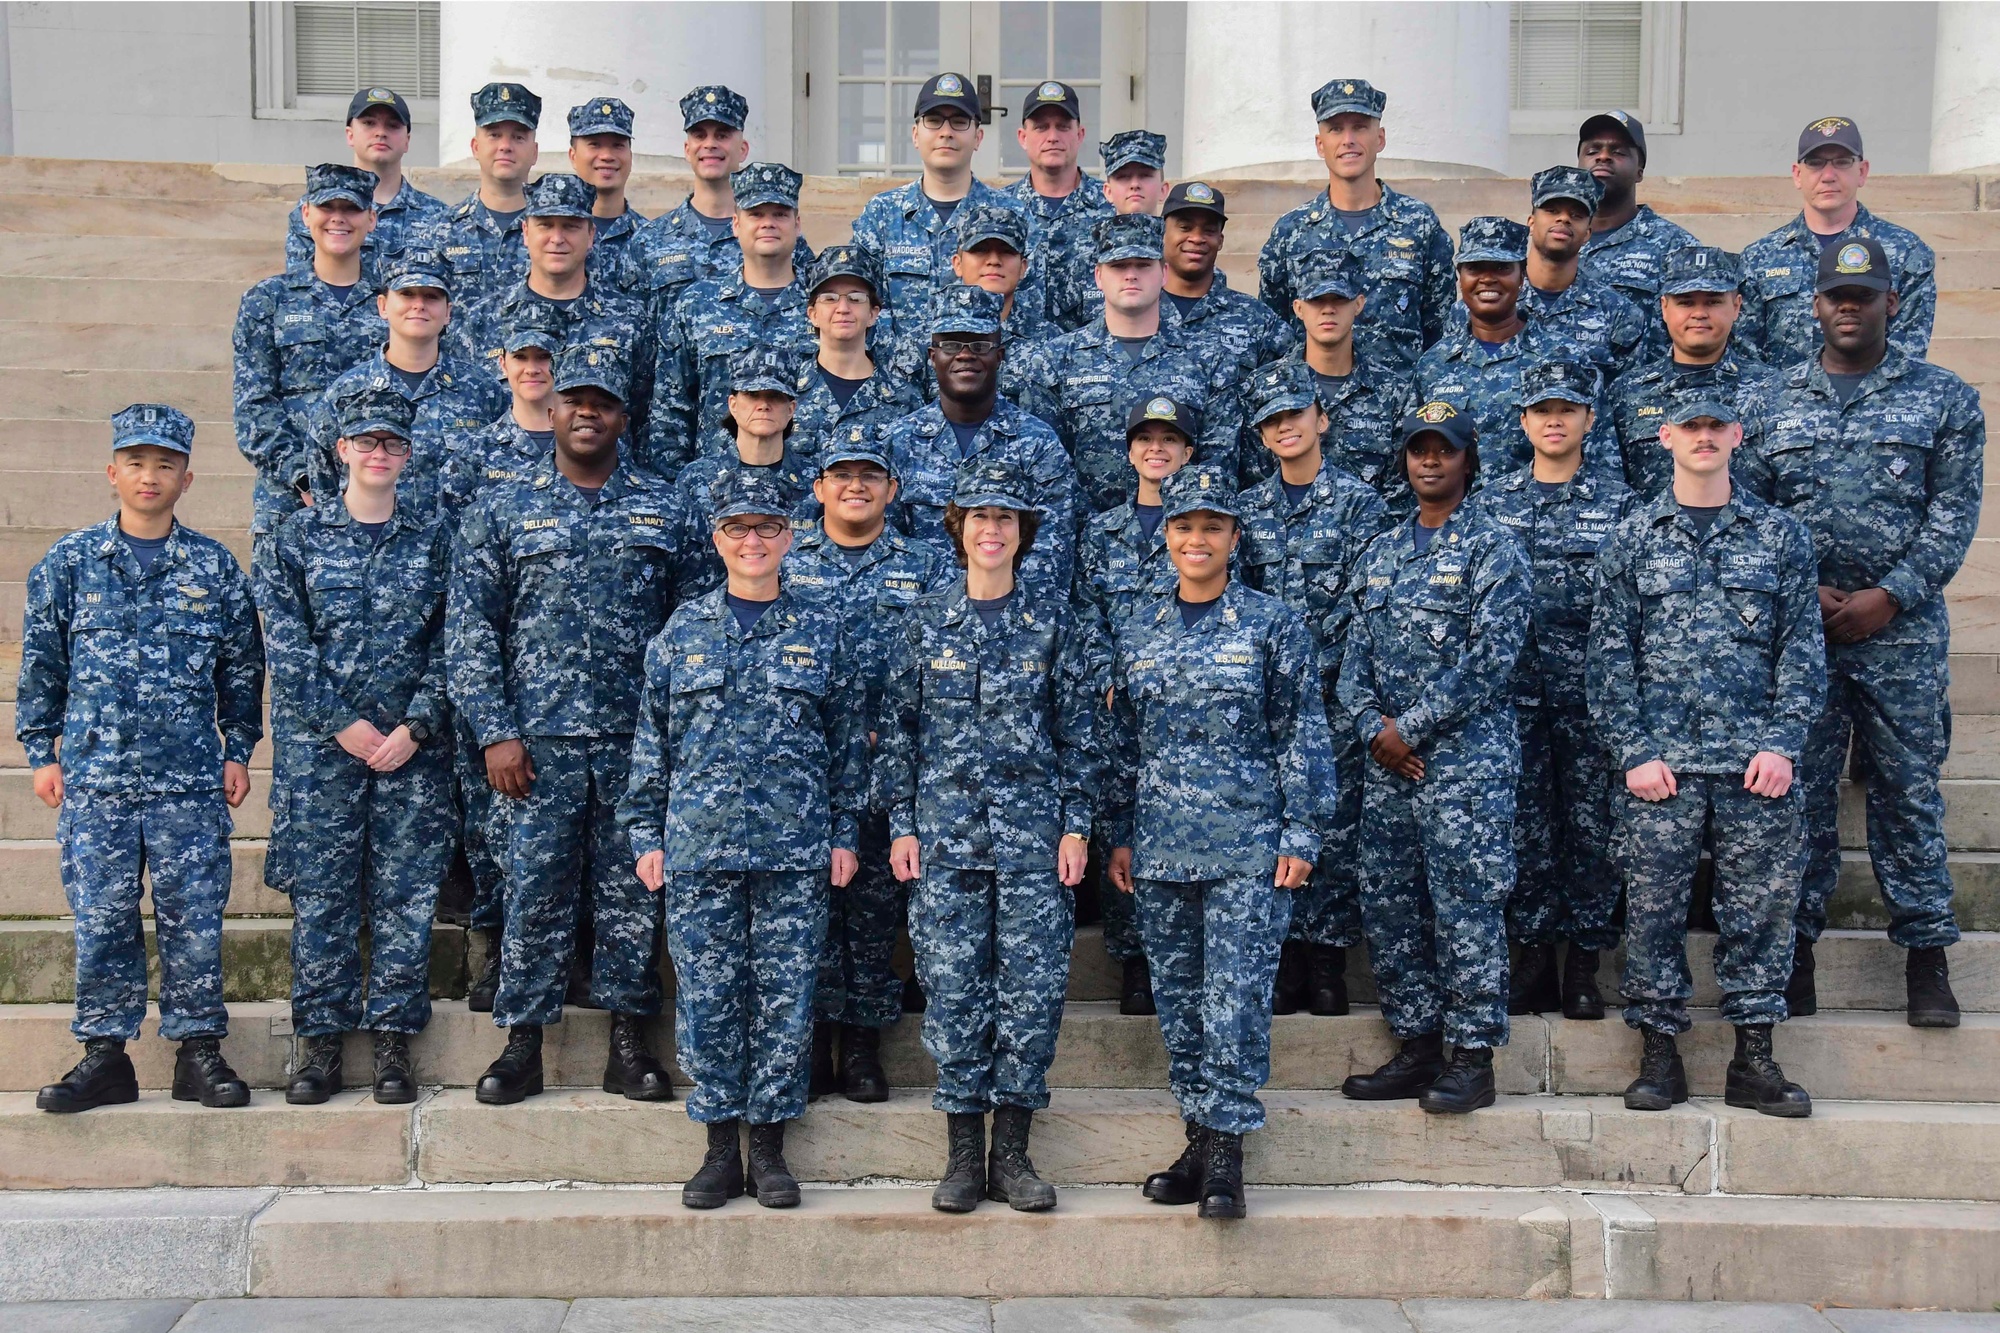 Navy bids farewell to blue camouflage uniforms known as